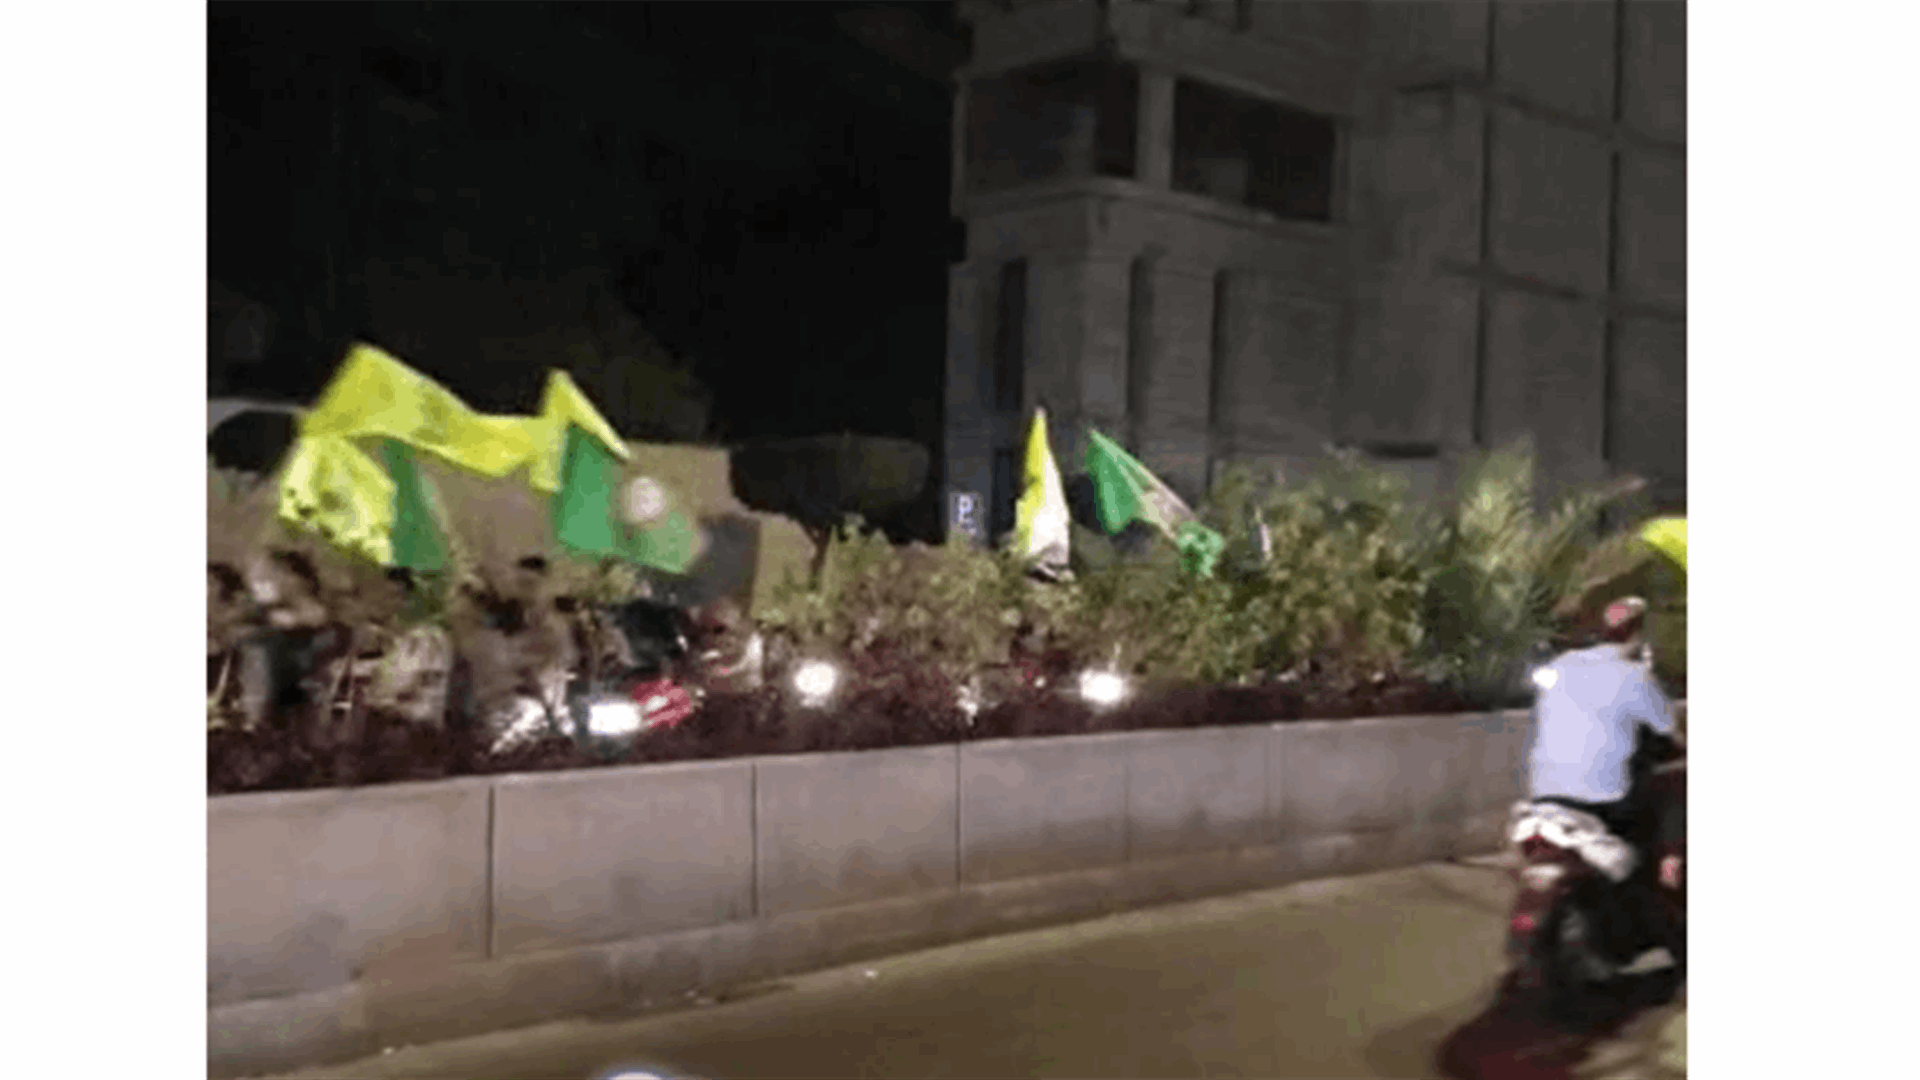 Supporters of AMAL and Hezbollah tour Beirut streets on motorcycles-[VIDEOS]